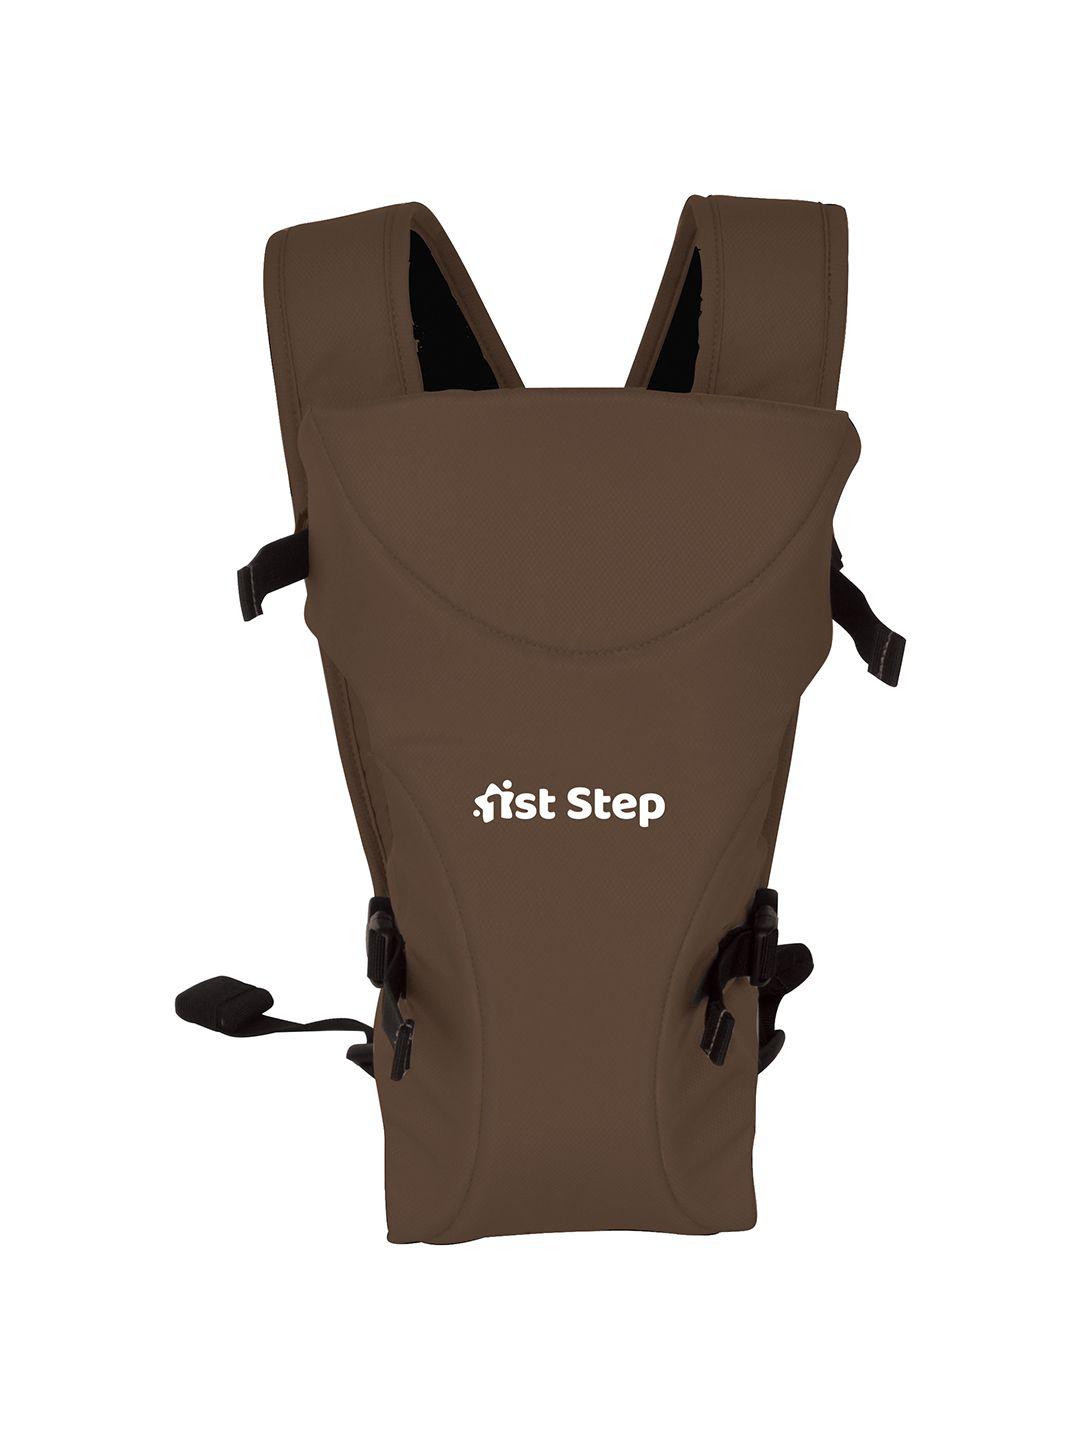 1st step brown 3 in 1 baby carrier with 3 carry positions